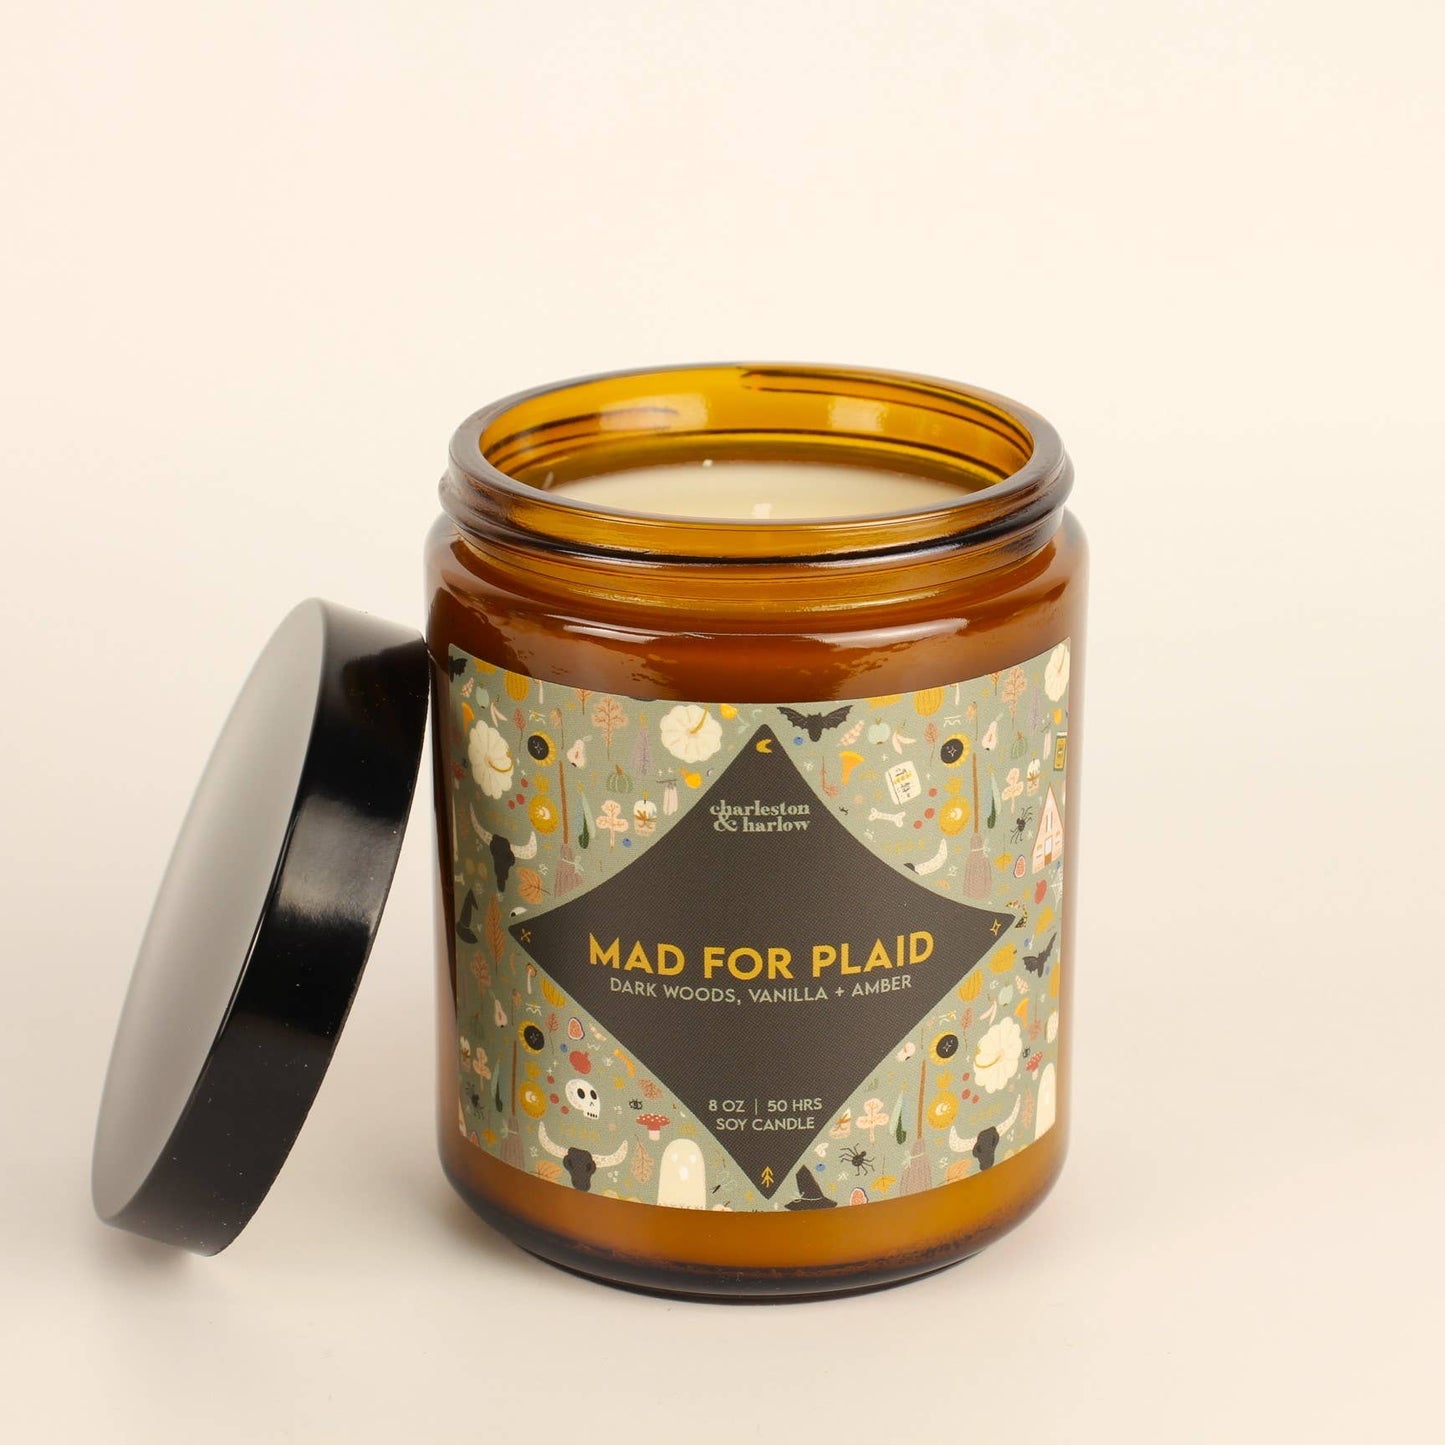 Charleston & Harlow Candle Co. - Mad for Plaid - Dark Woods, Vanilla + Amber 8oz FALL Candle